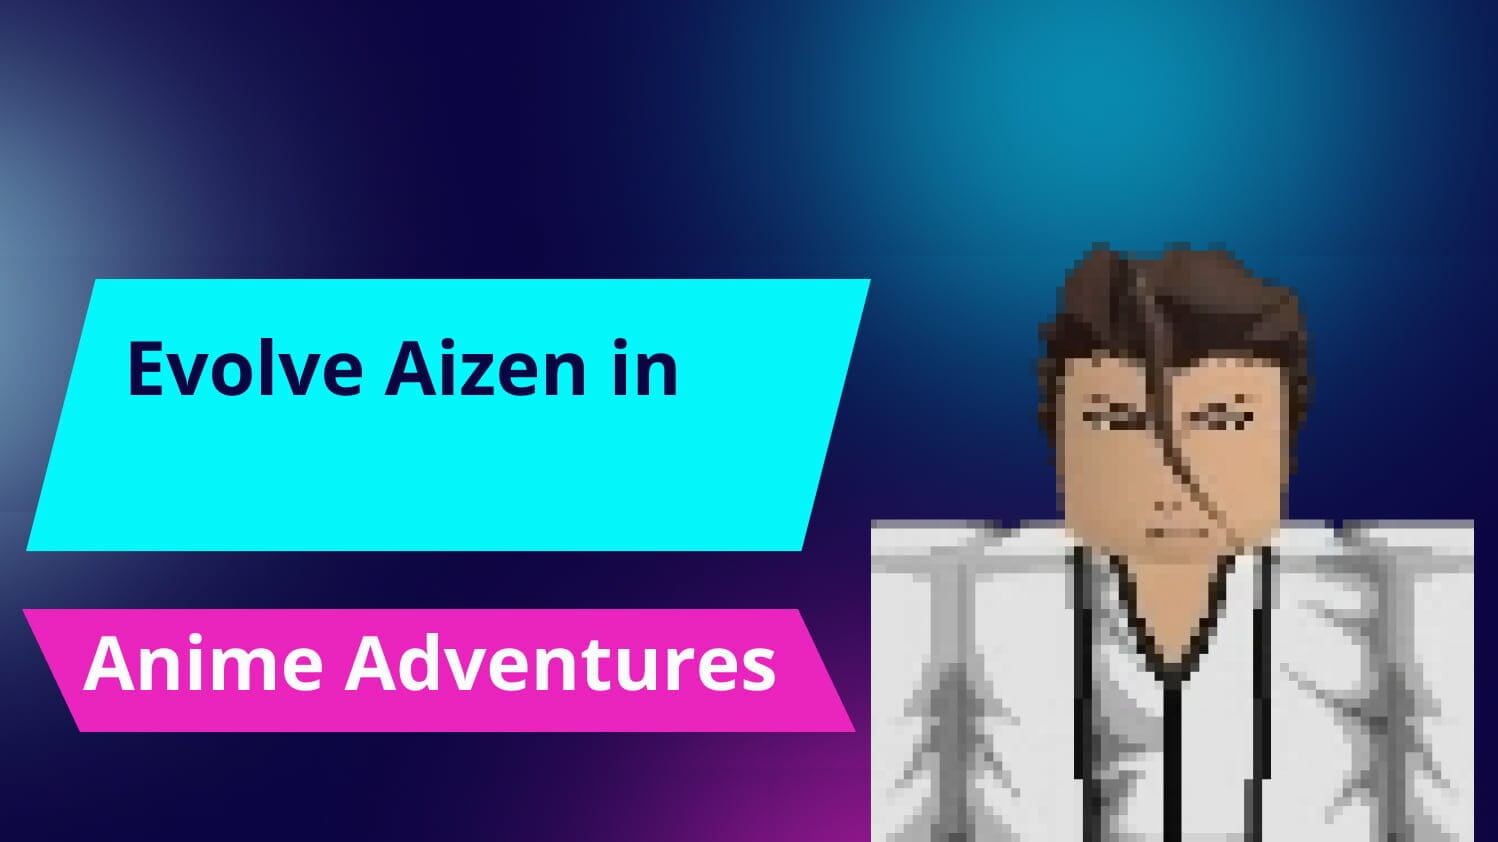 How To Evolve Aizen In Anime Adventures?